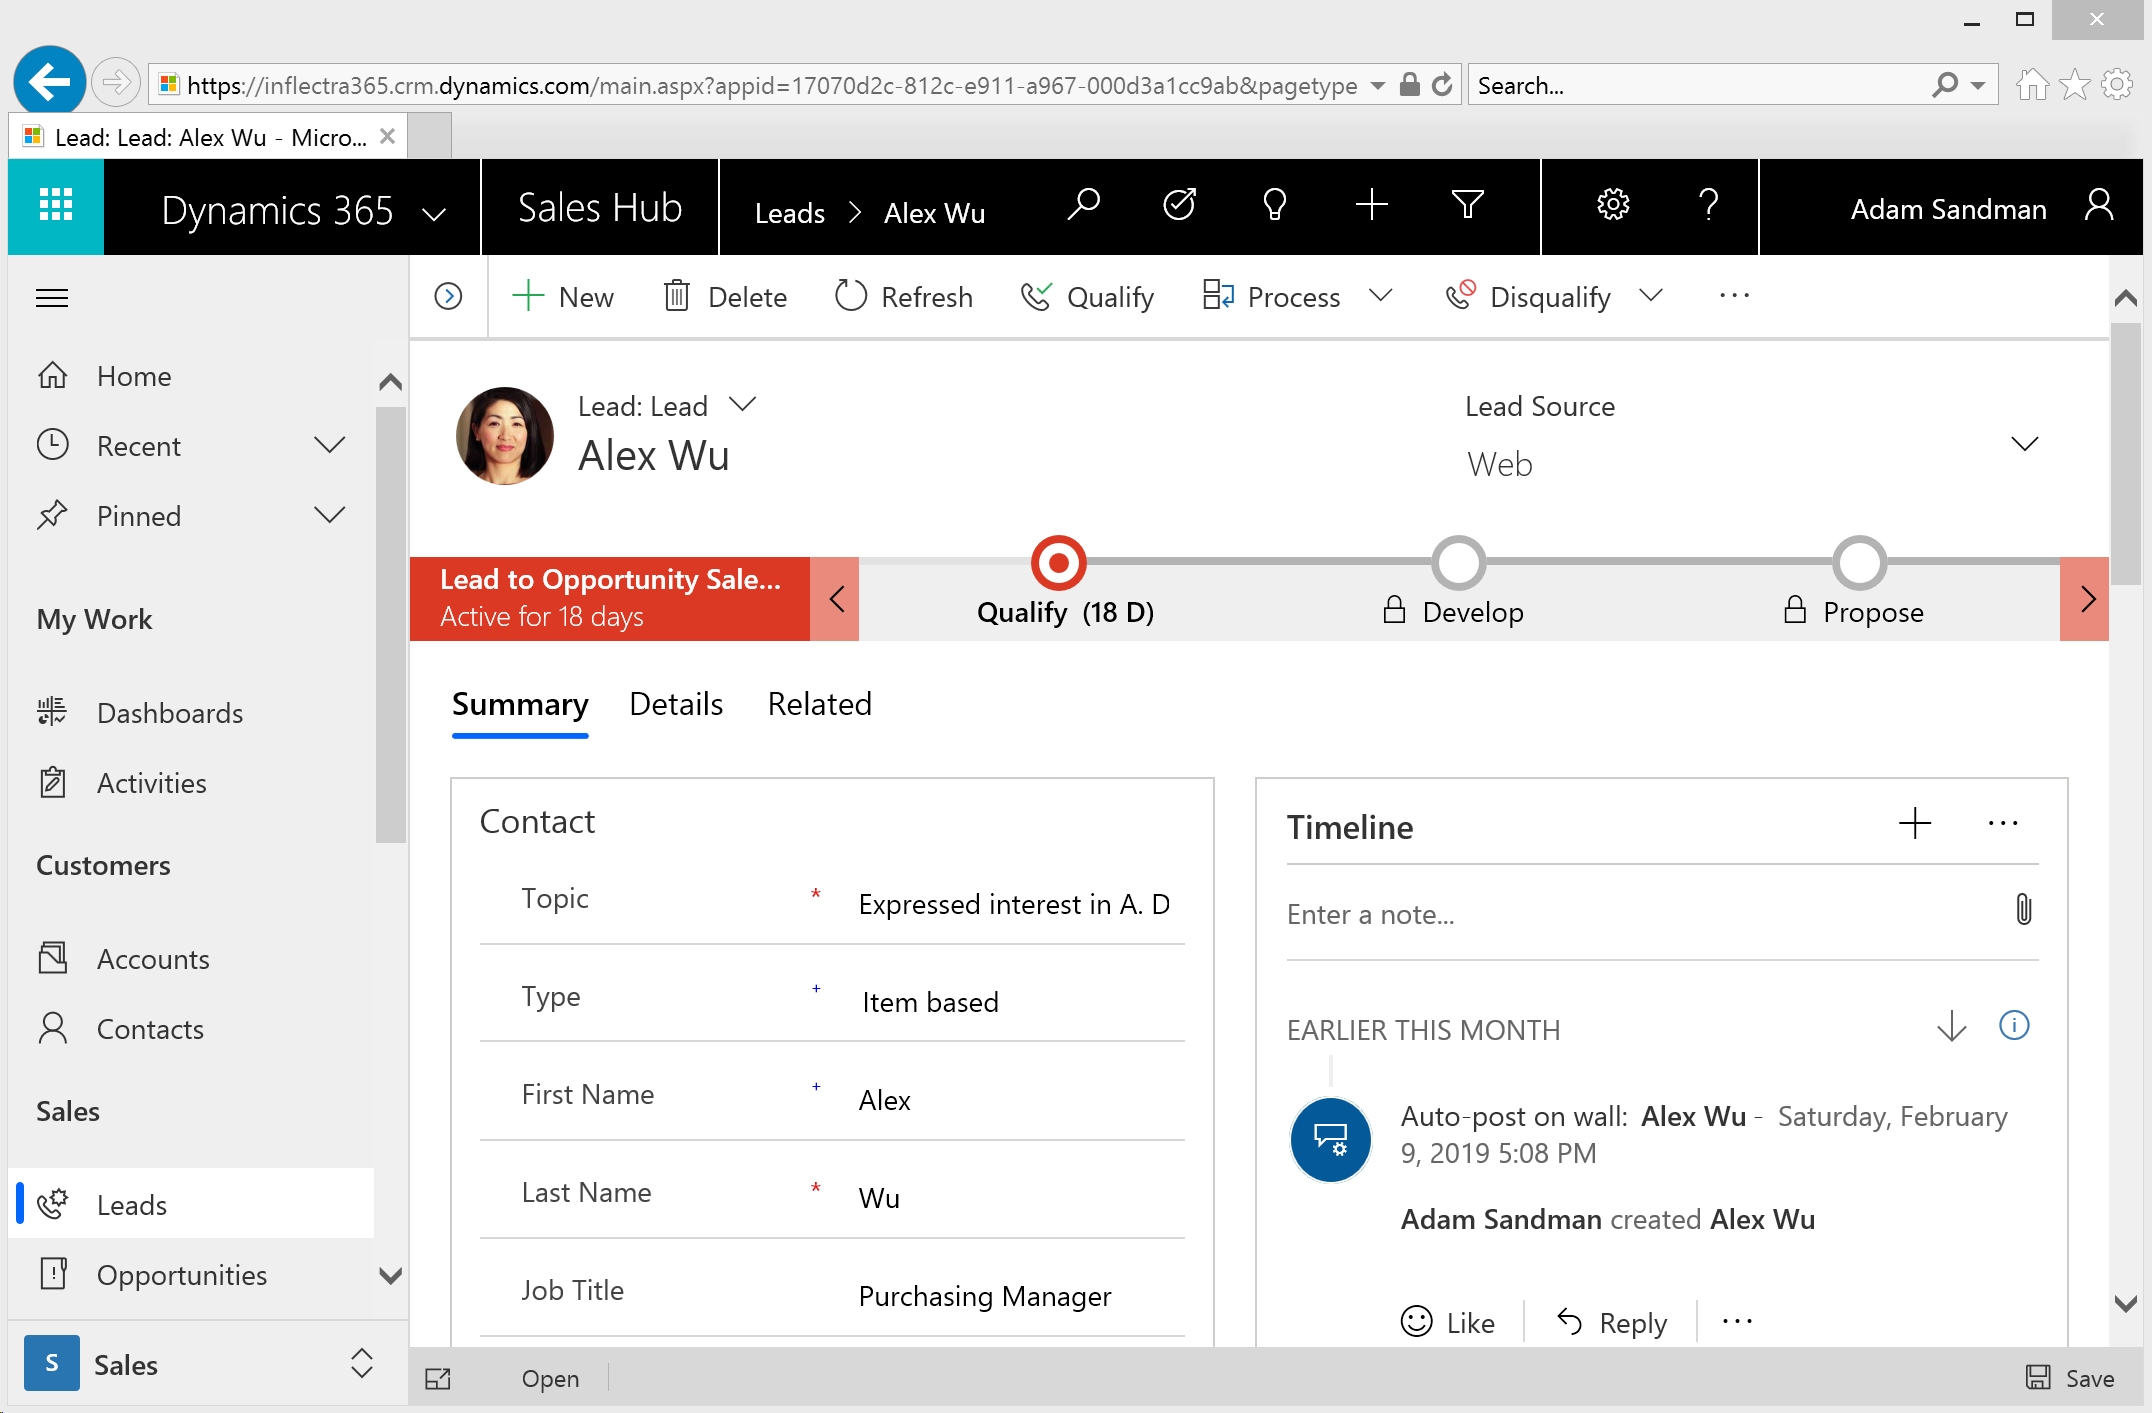 Dynamics 365 for Sales Unified Interface